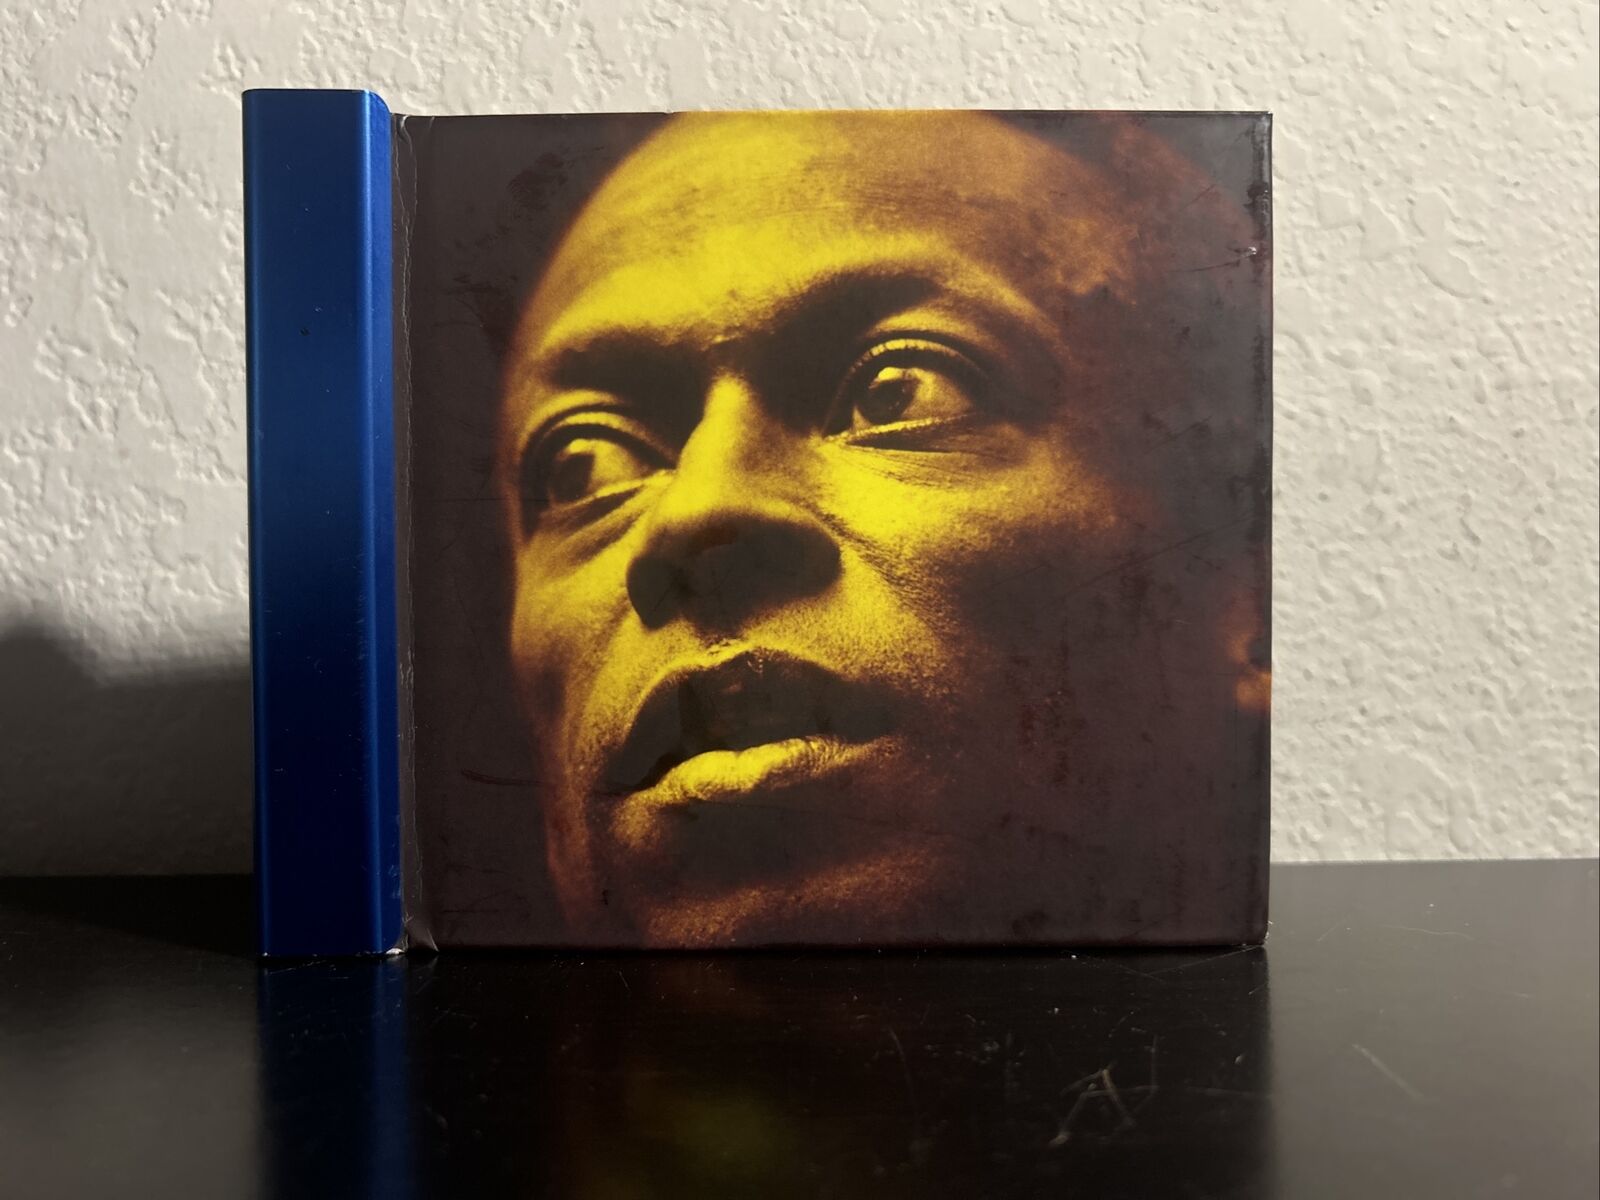 Miles Davis - The Complete Bitches Brew Sessions (4 CD Box Set, Legacy, 1998)